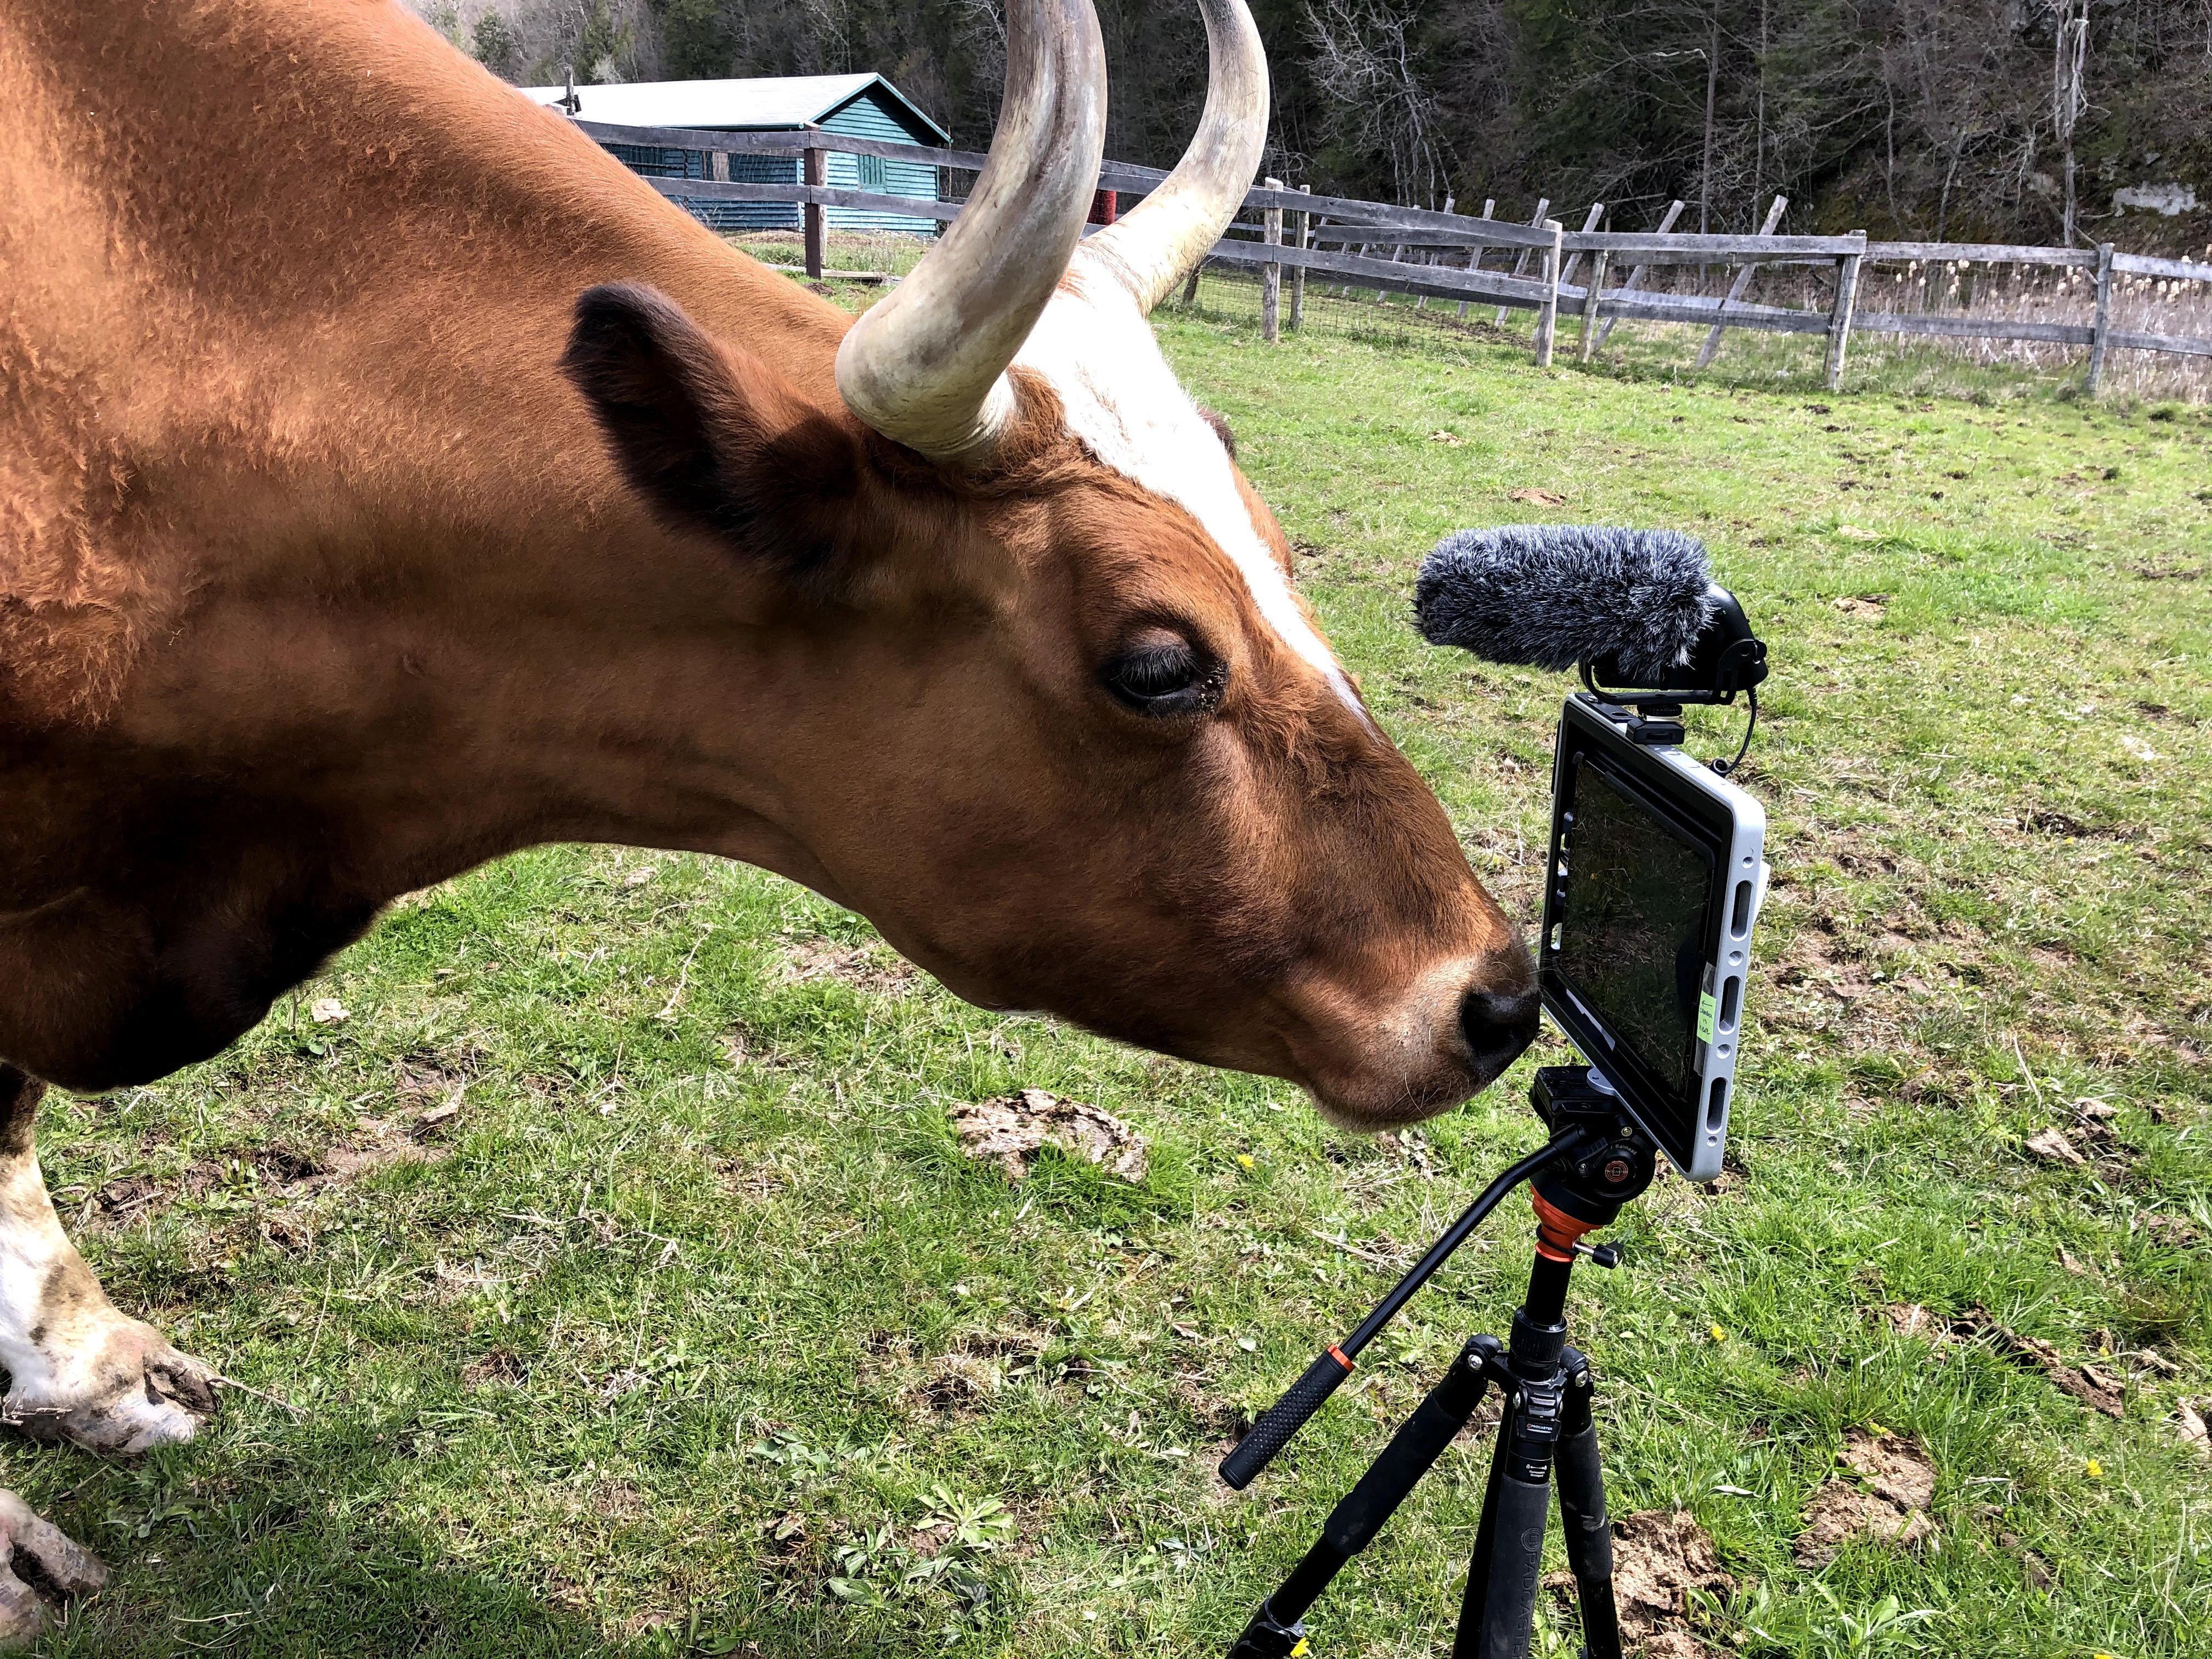 Goat bombed: Invite an Upstate NY farm animal to your next video call -  